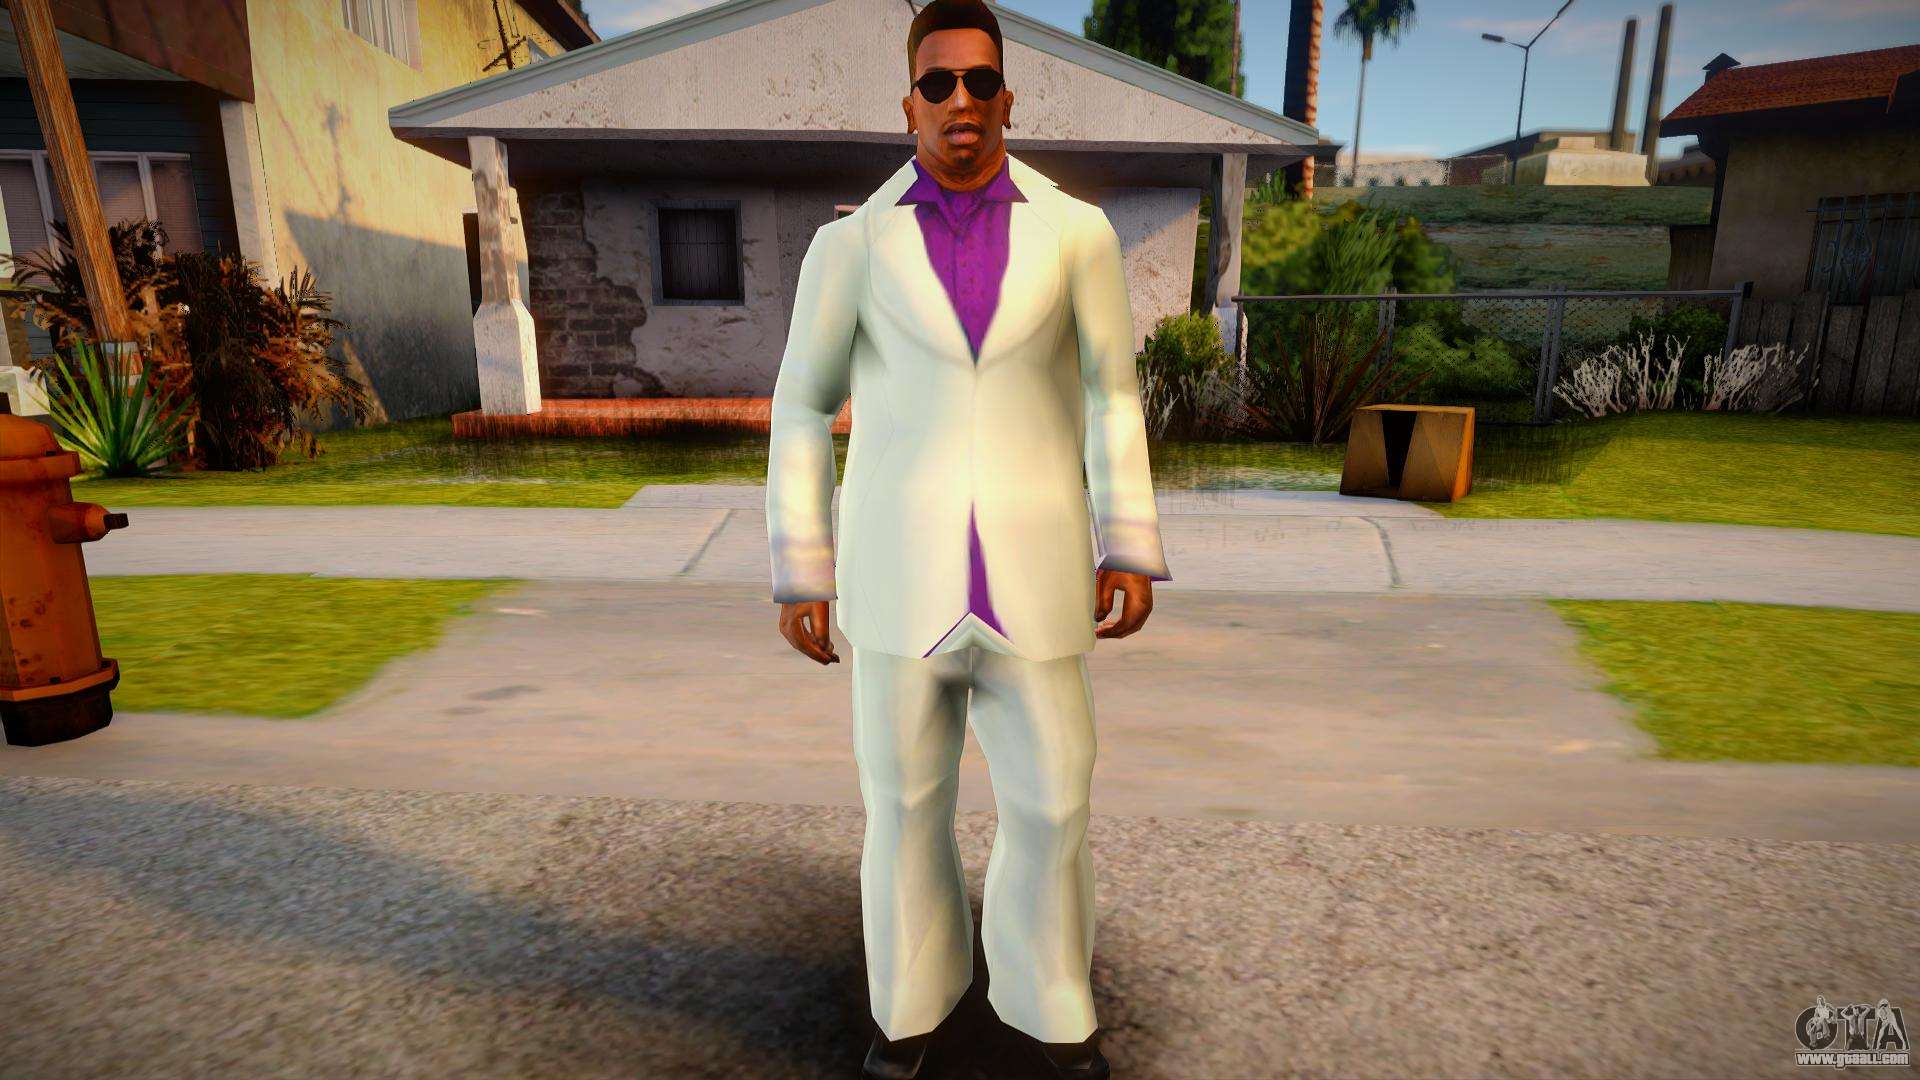 Lance Vance white suit for CJ for GTA San Andreas